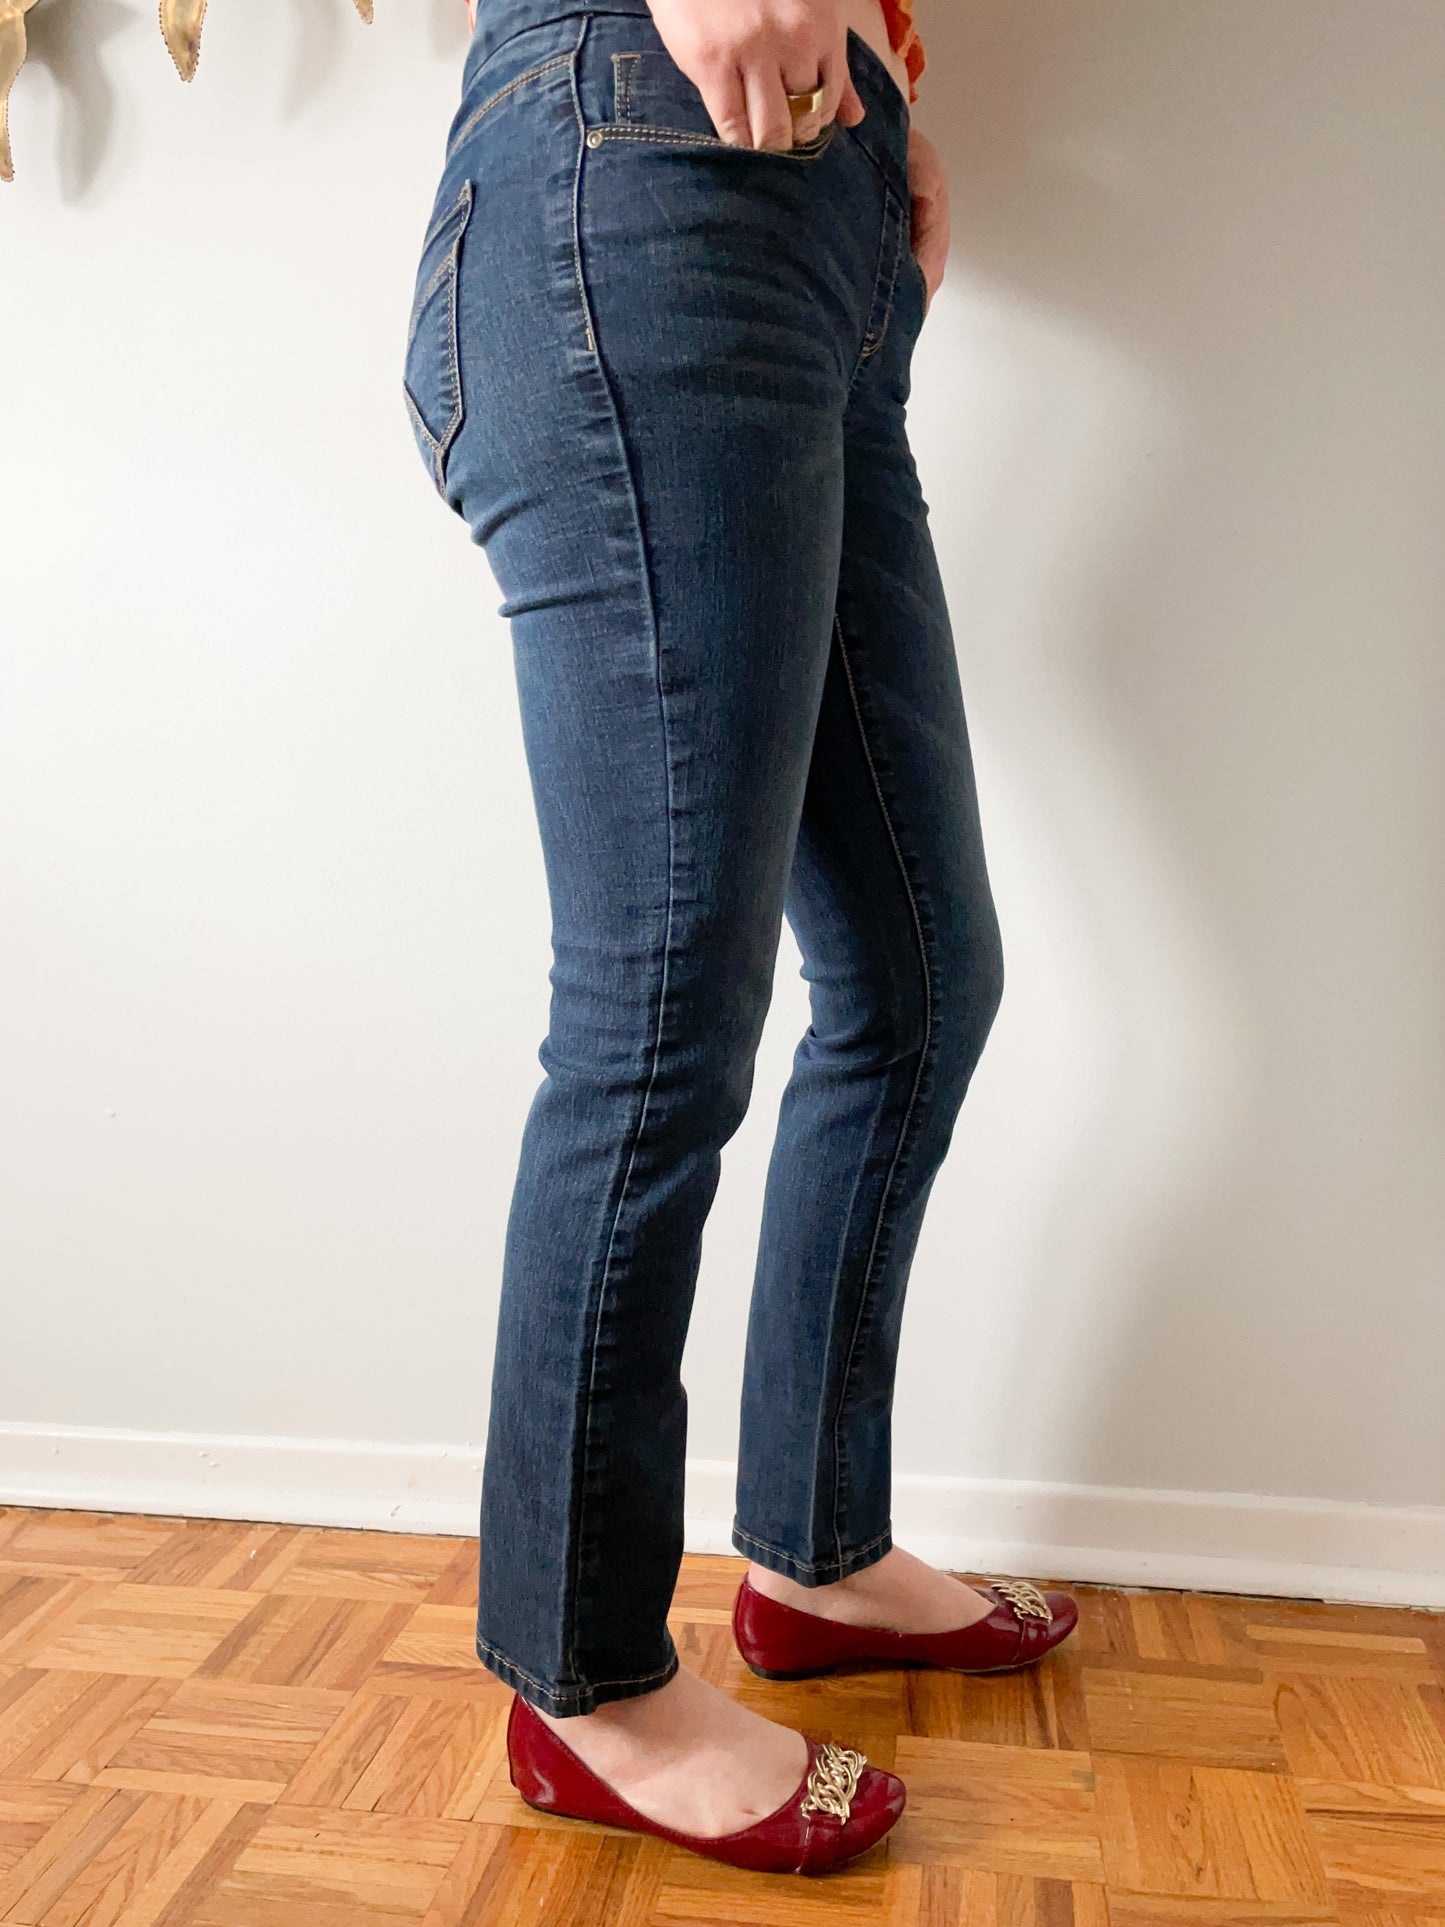 Pull On Straight Leg Mid Rise Jeans - XS/S